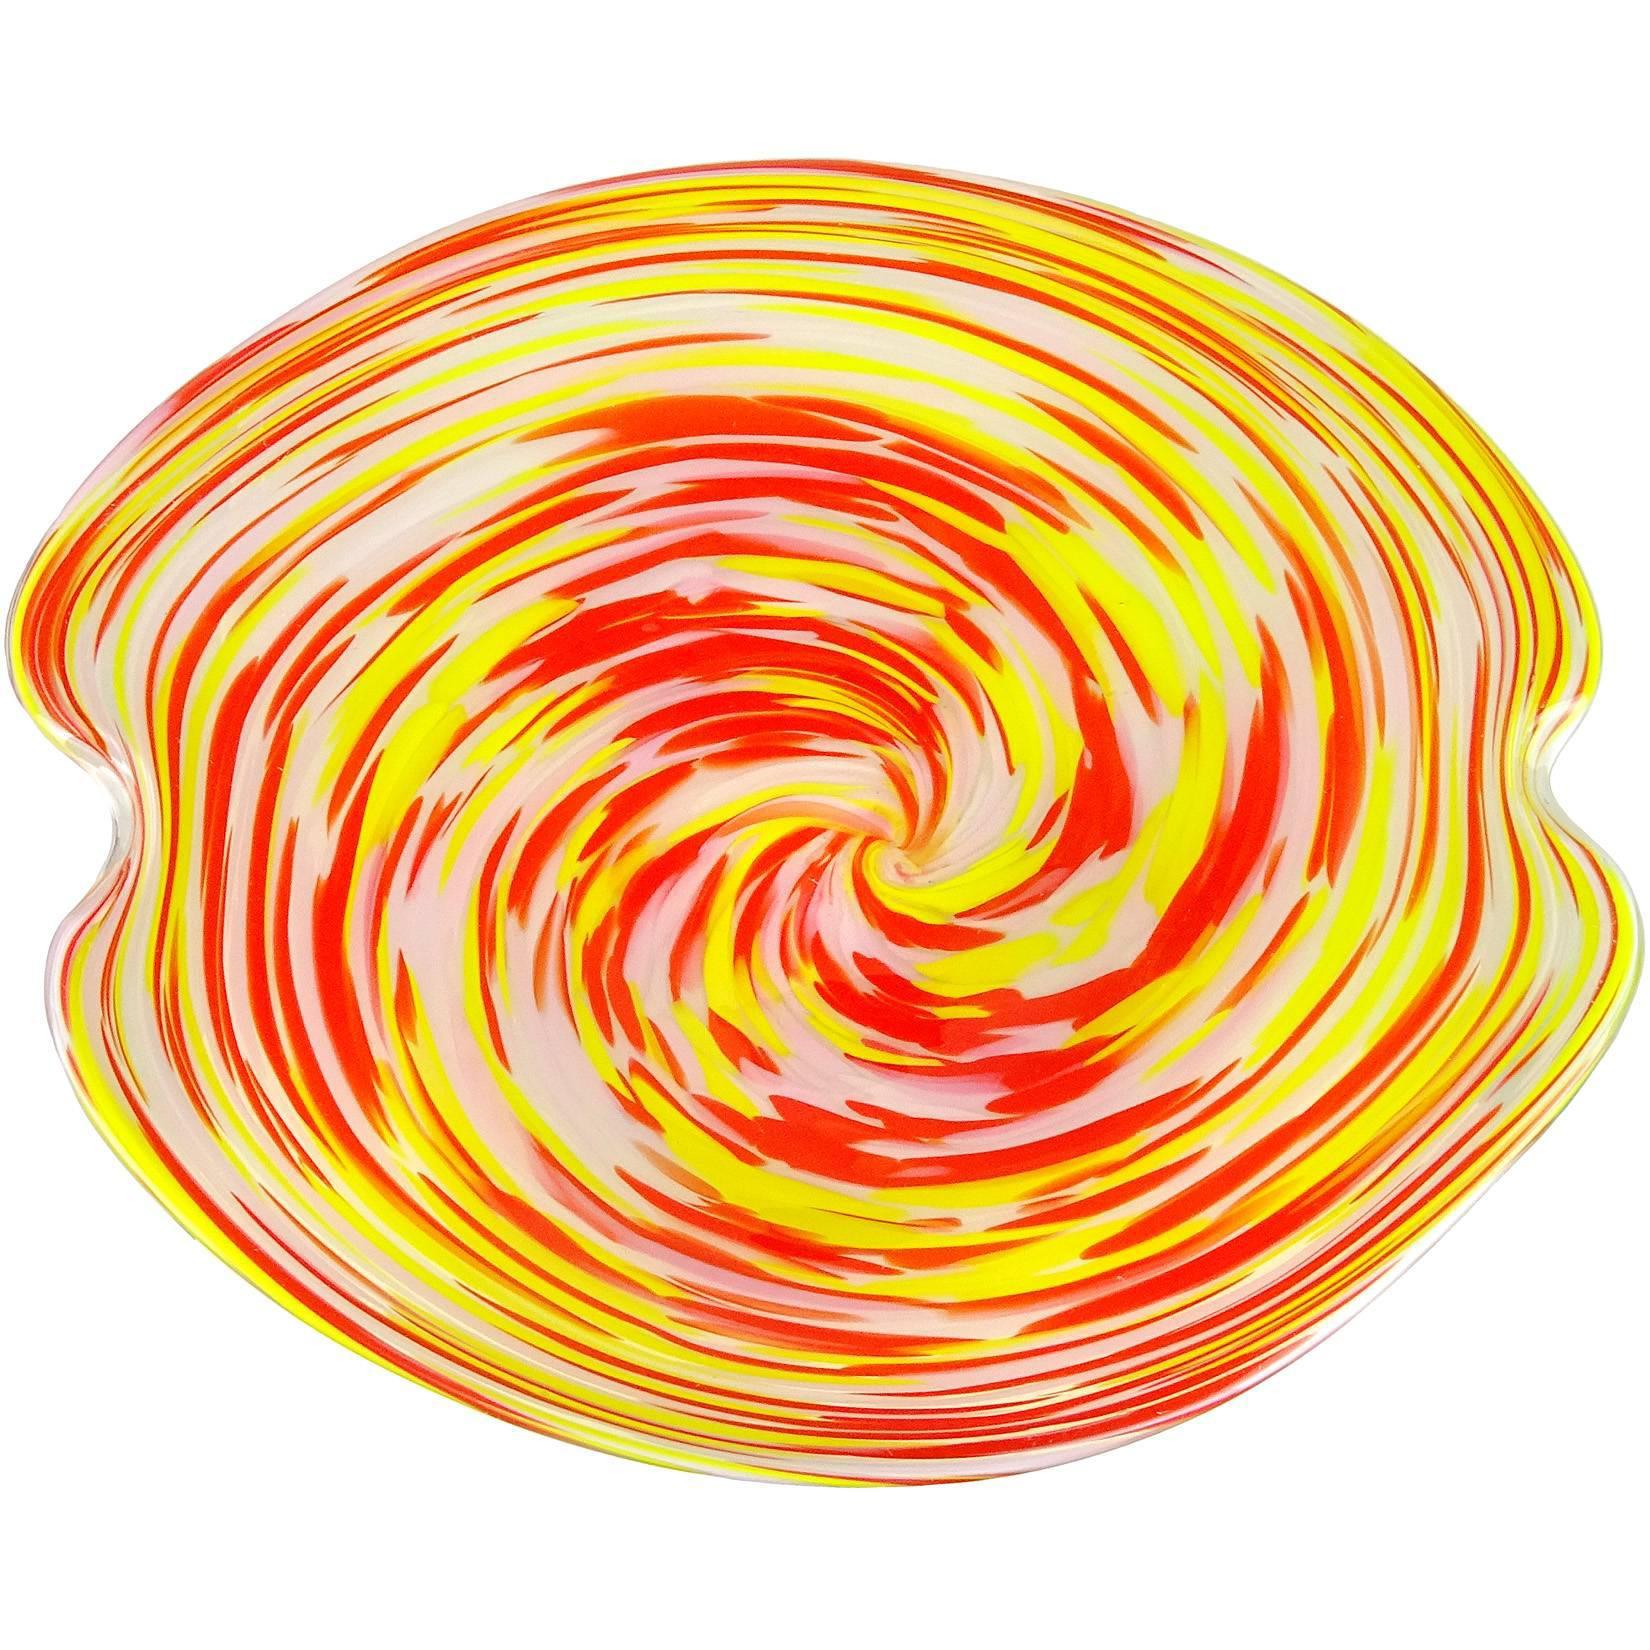 Hand-Crafted Fratelli Toso Murano Psychedelic Yellow Orange Opal Italian Art Glass Bowl